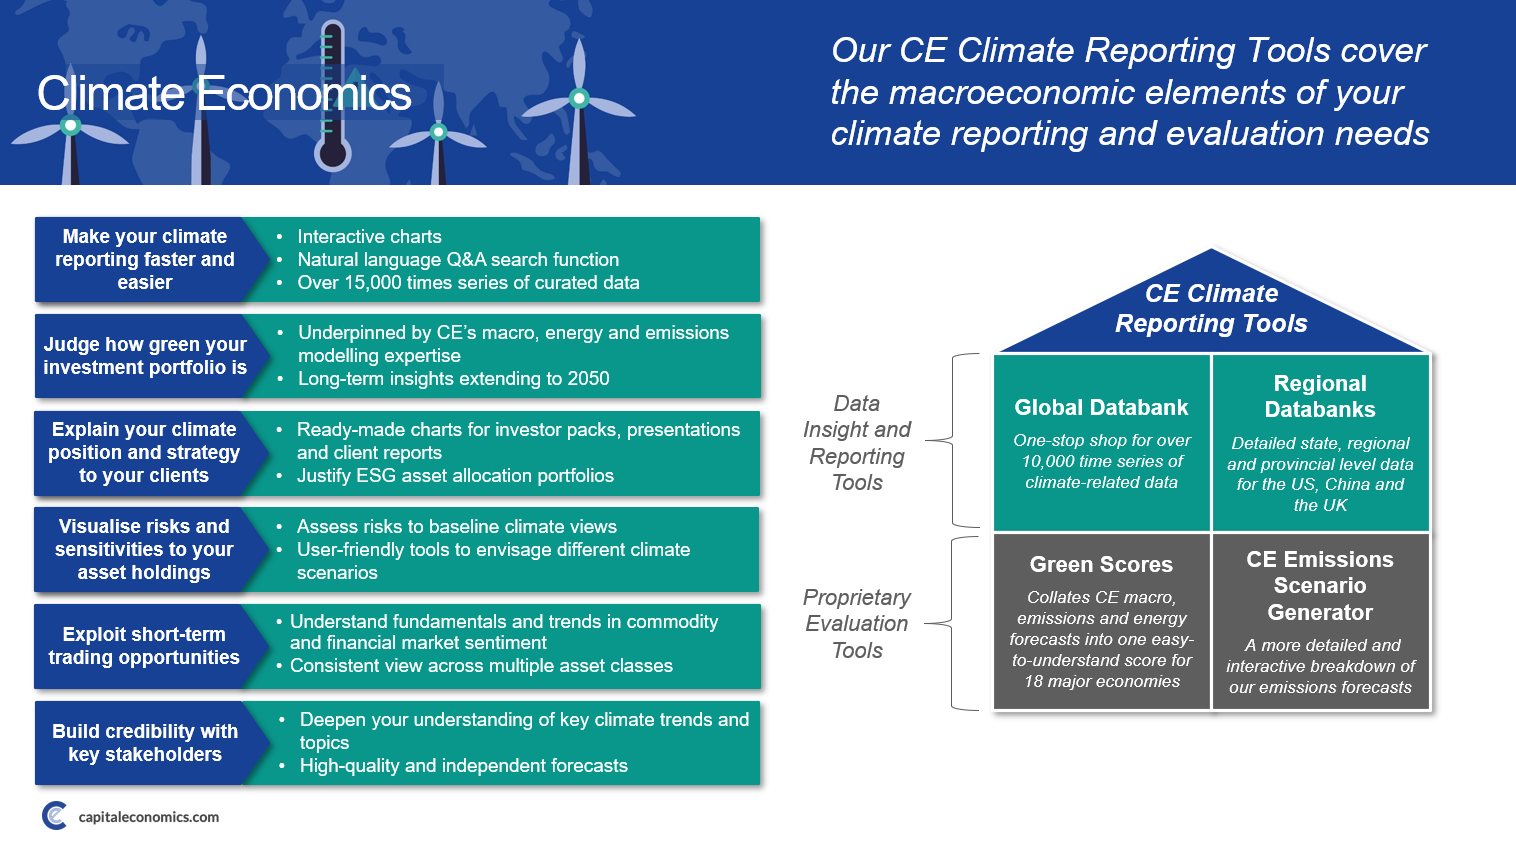 CE Climate Reporting Tools overview